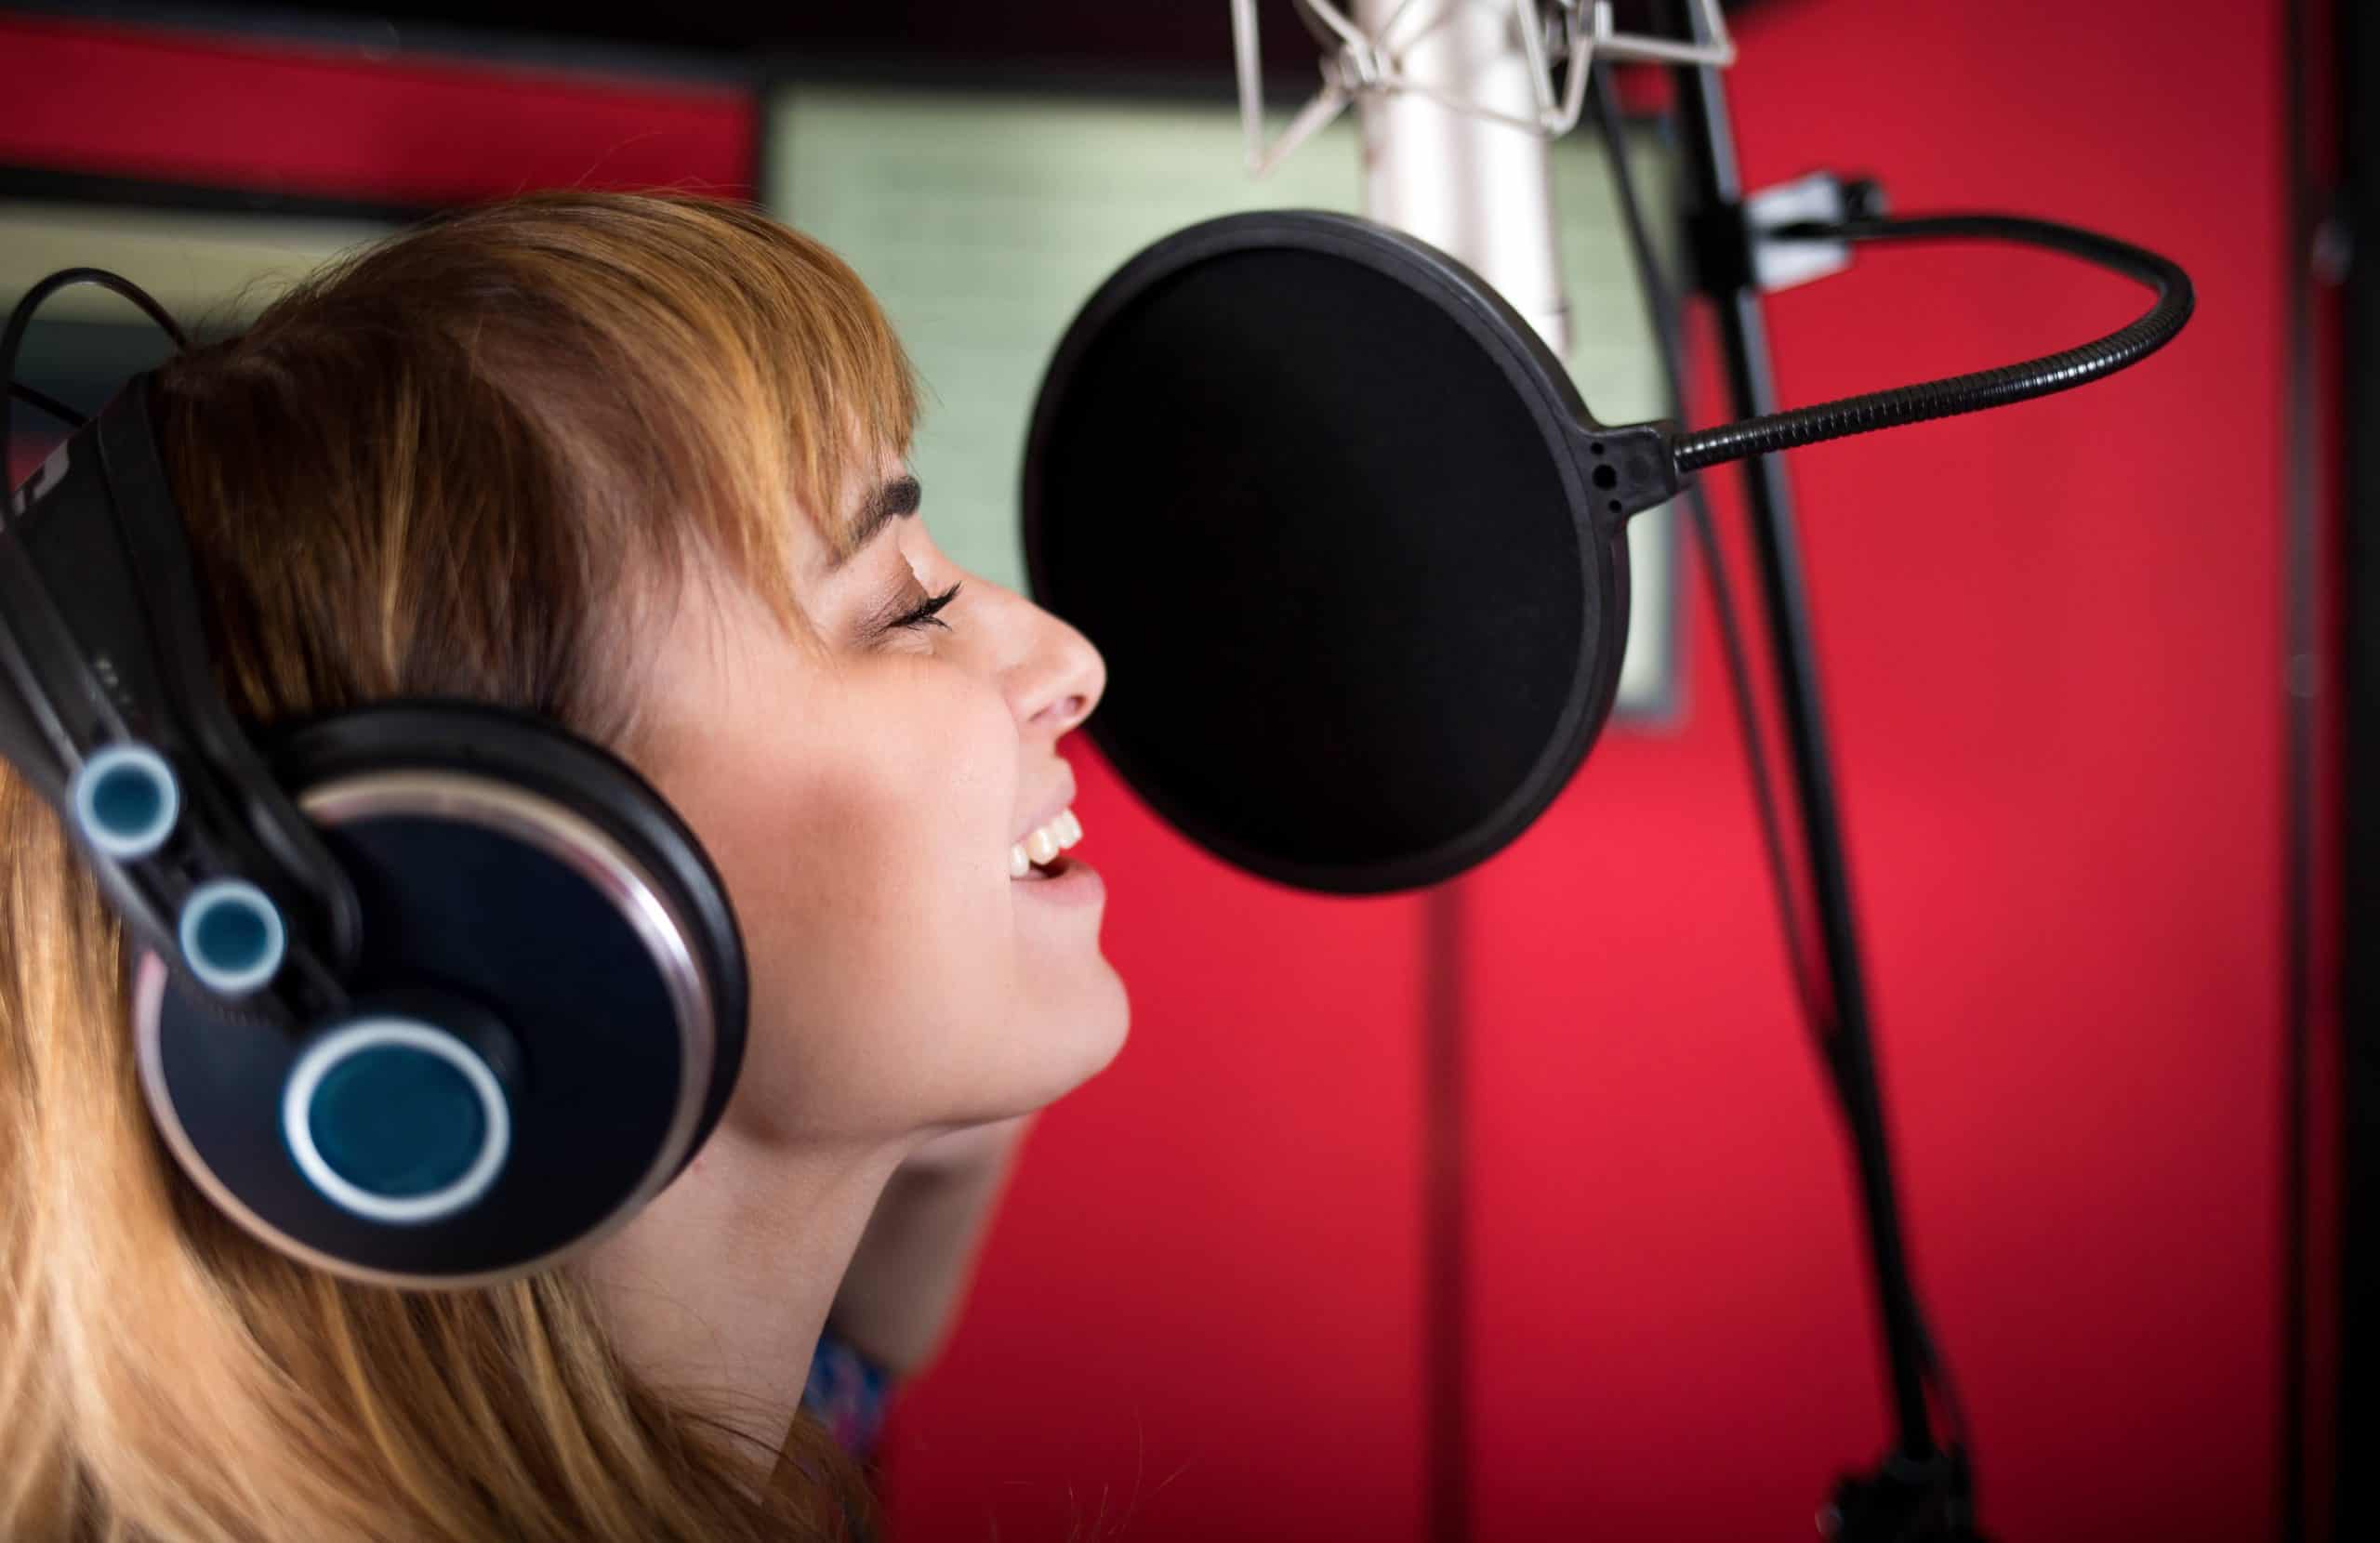 What are some voiceover audition tips for beginners